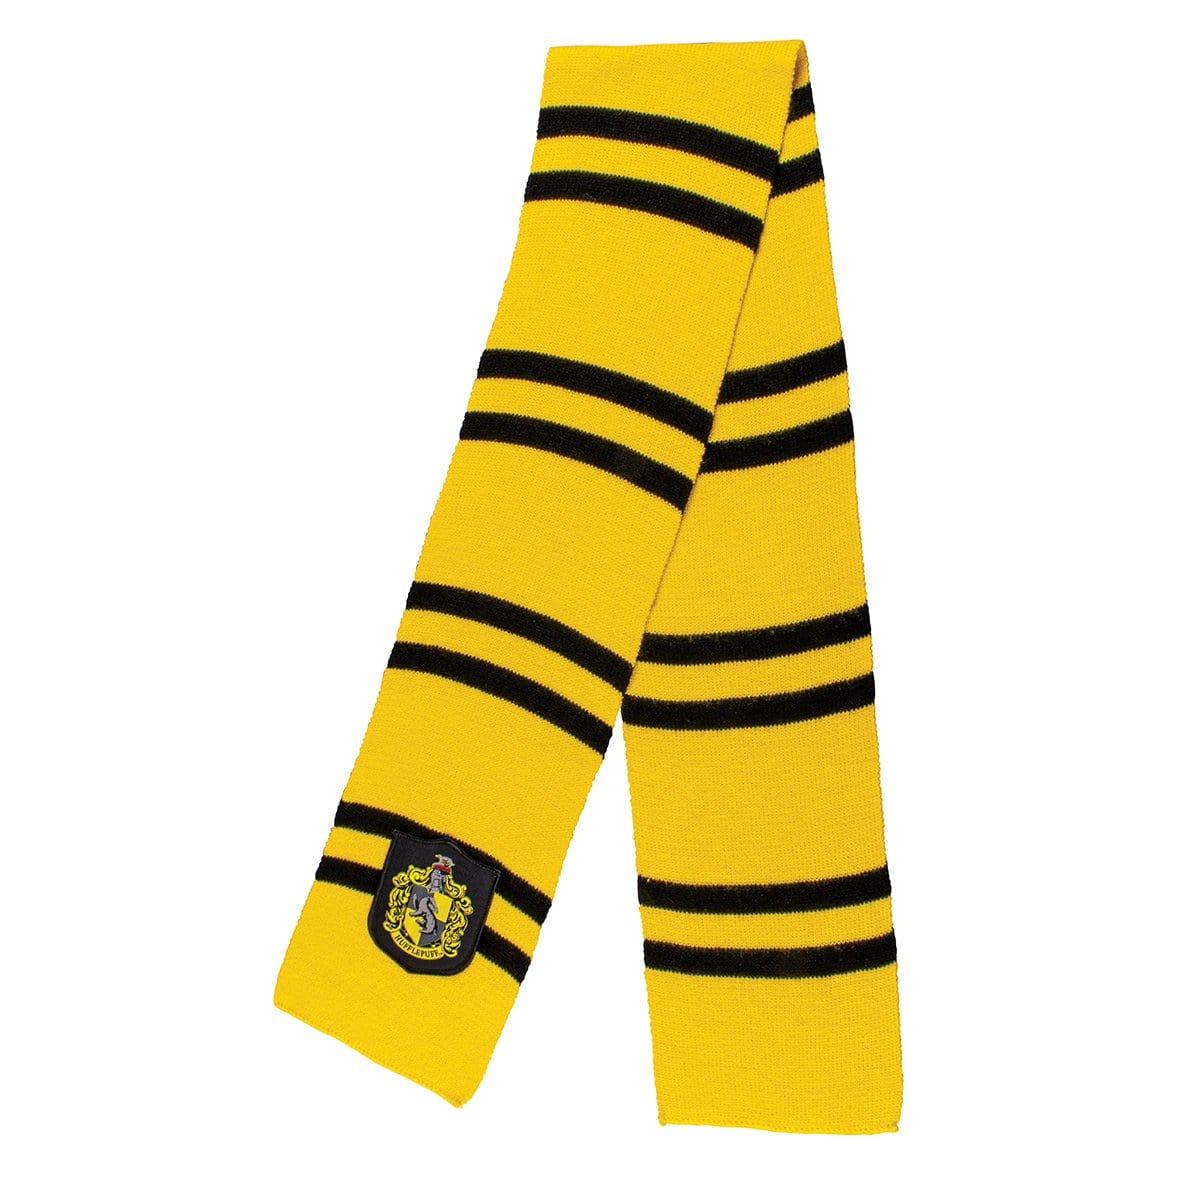 Buy Costume Accessories Hufflepuff Scarf, Harry potter sold at Party Expert